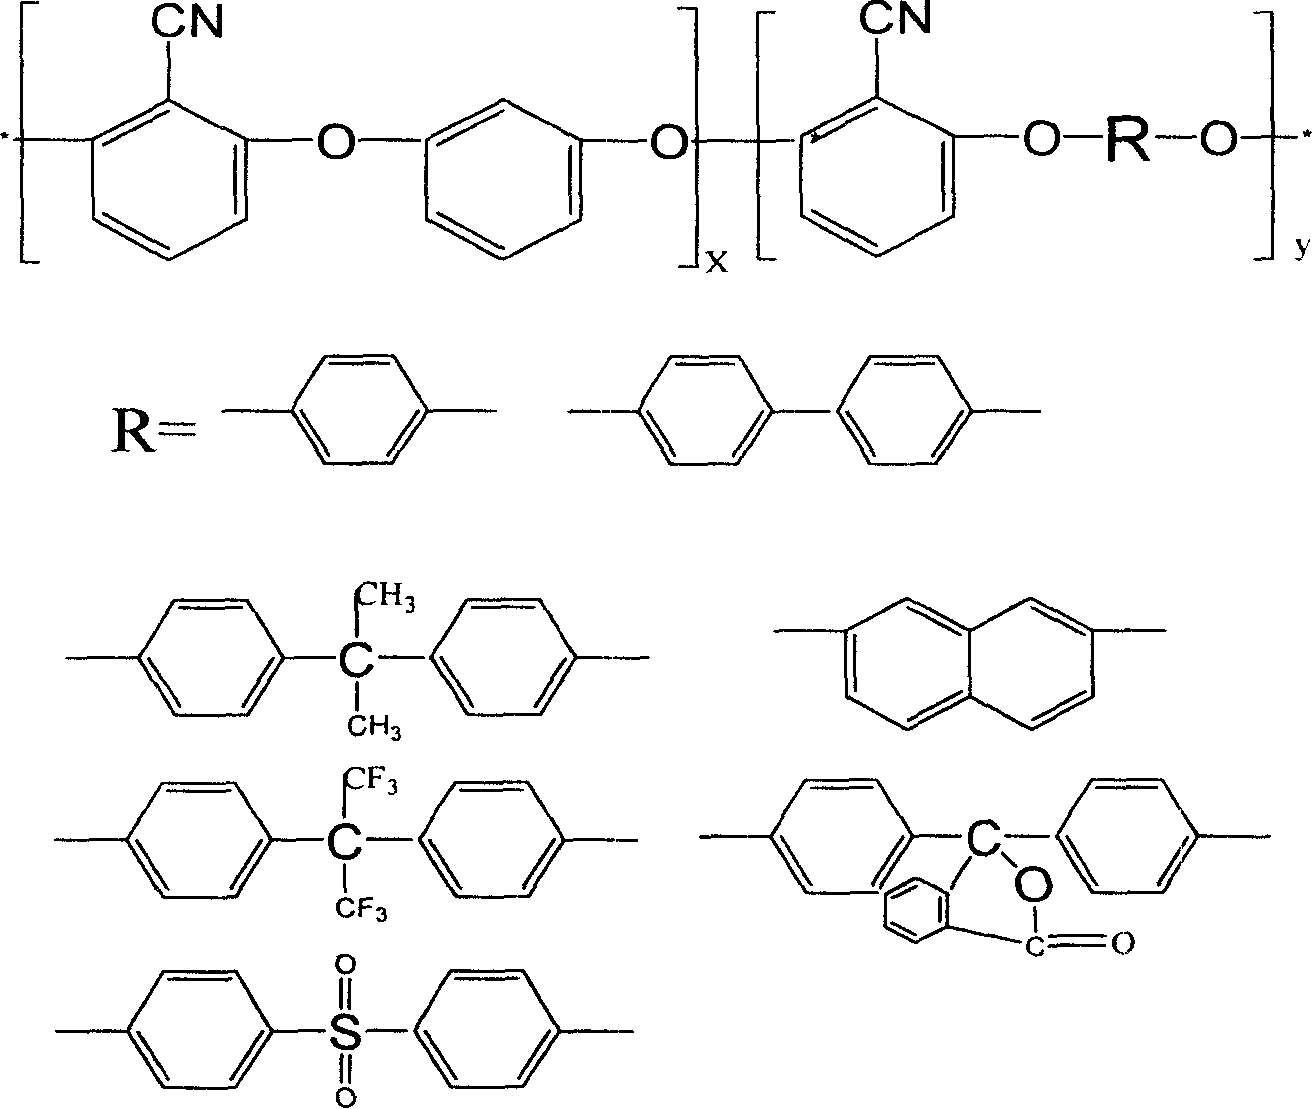 Copolymer of polyarylether nitrile containing chian element of iso-benzene and preparation method